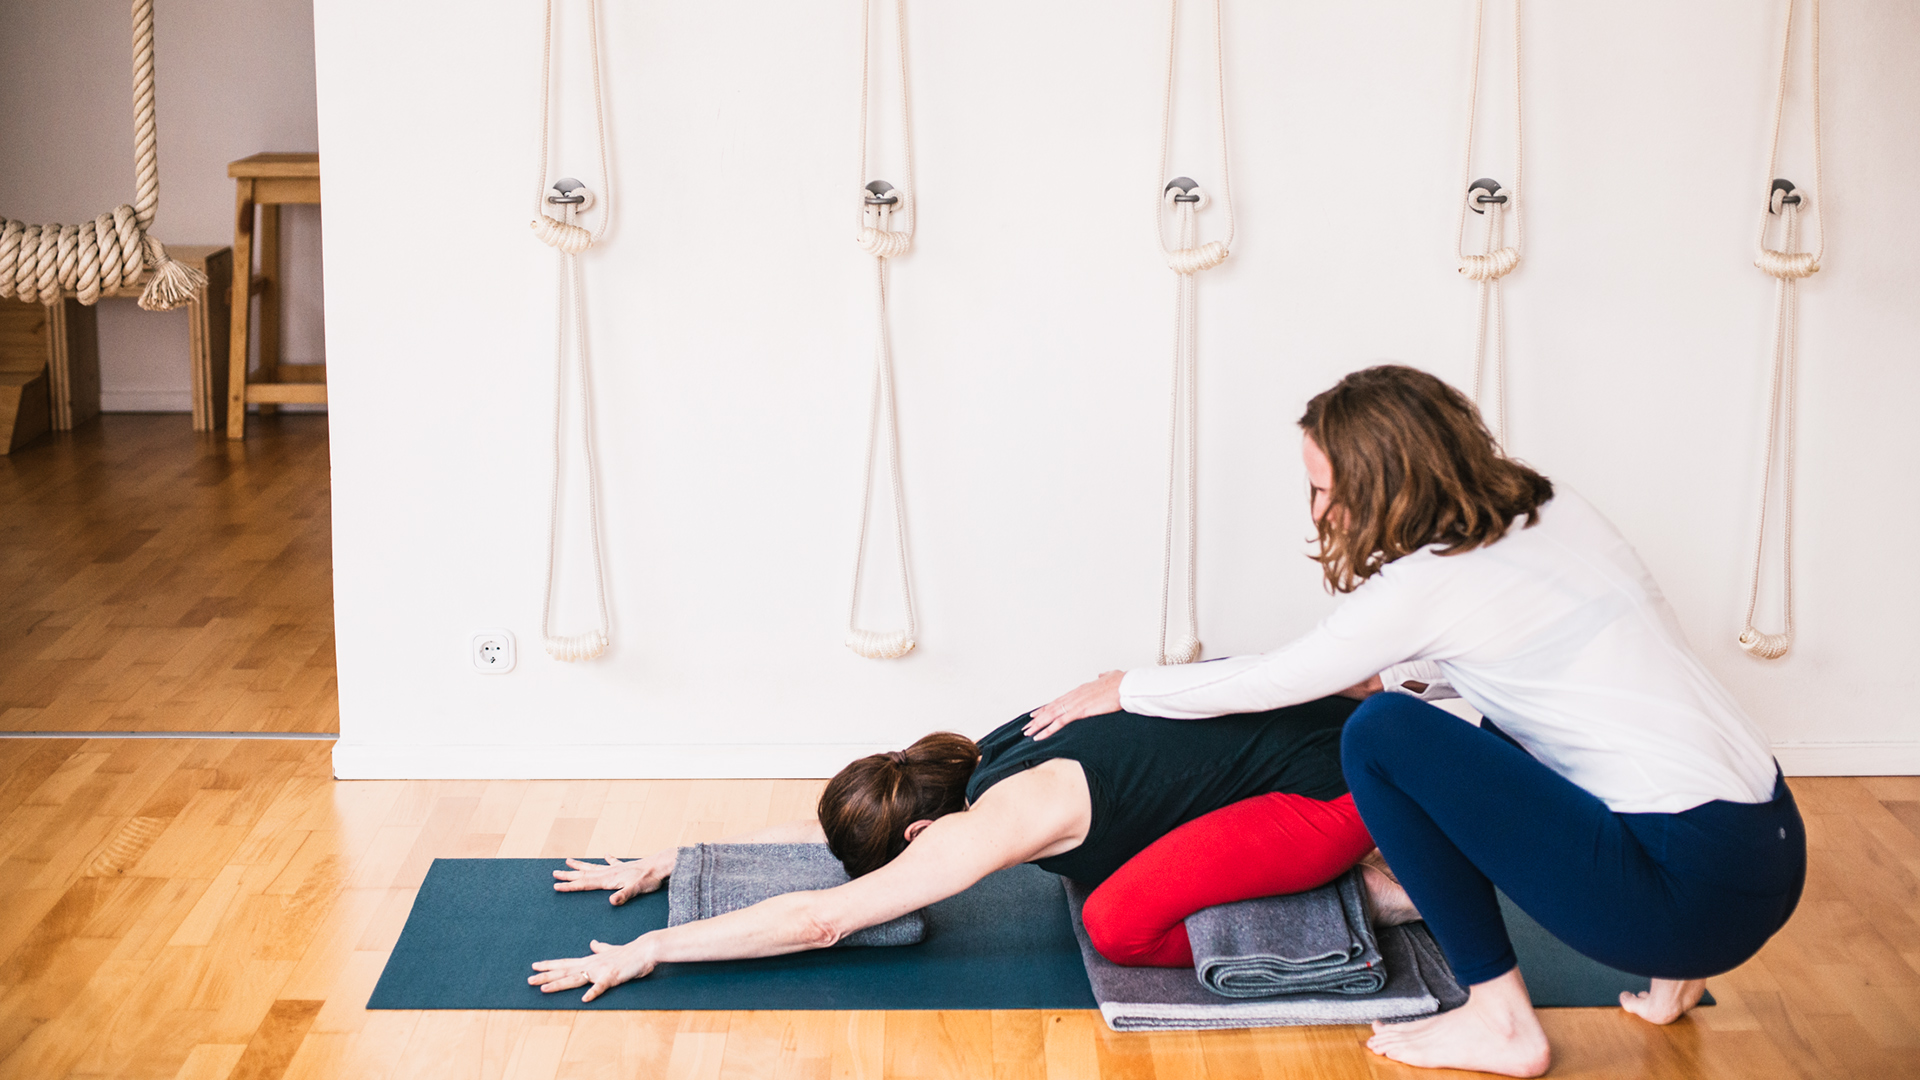 Alanna Lawley and Elizabeth Smullens Brass - Iyengar Yoga General Level Sequence - Child's pose – Adho Mukha Virasana with blankets